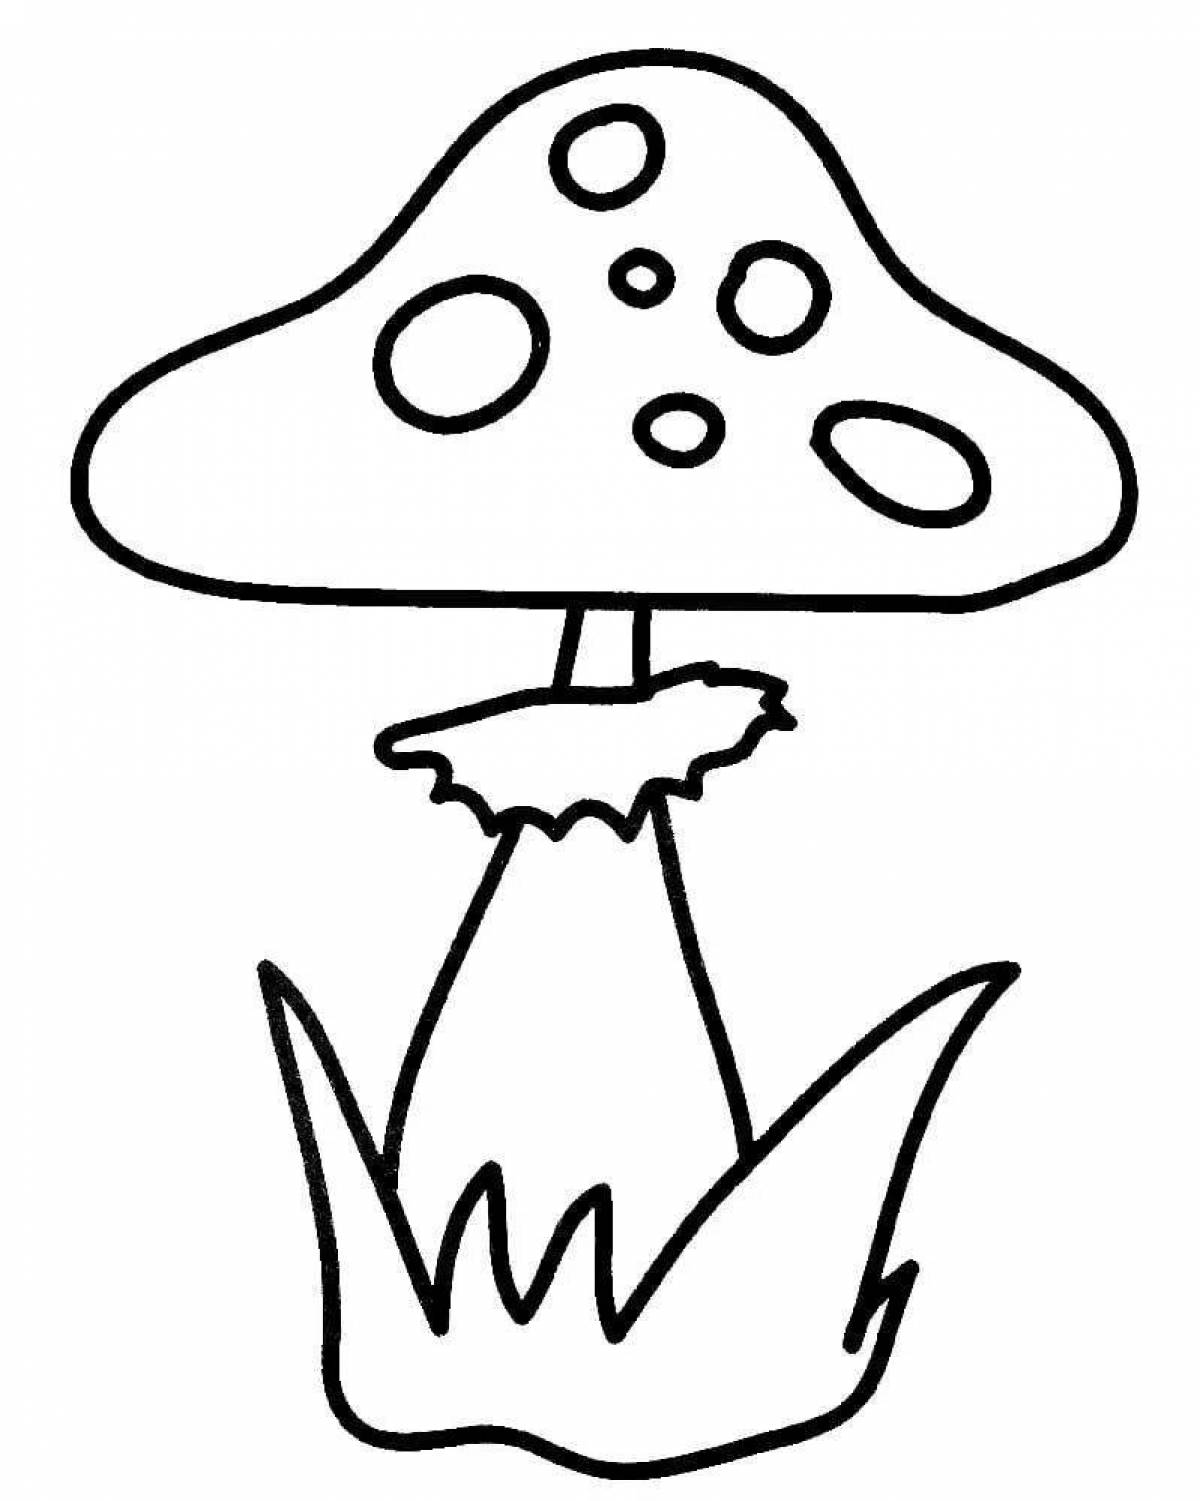 Fabulous fly agaric coloring page